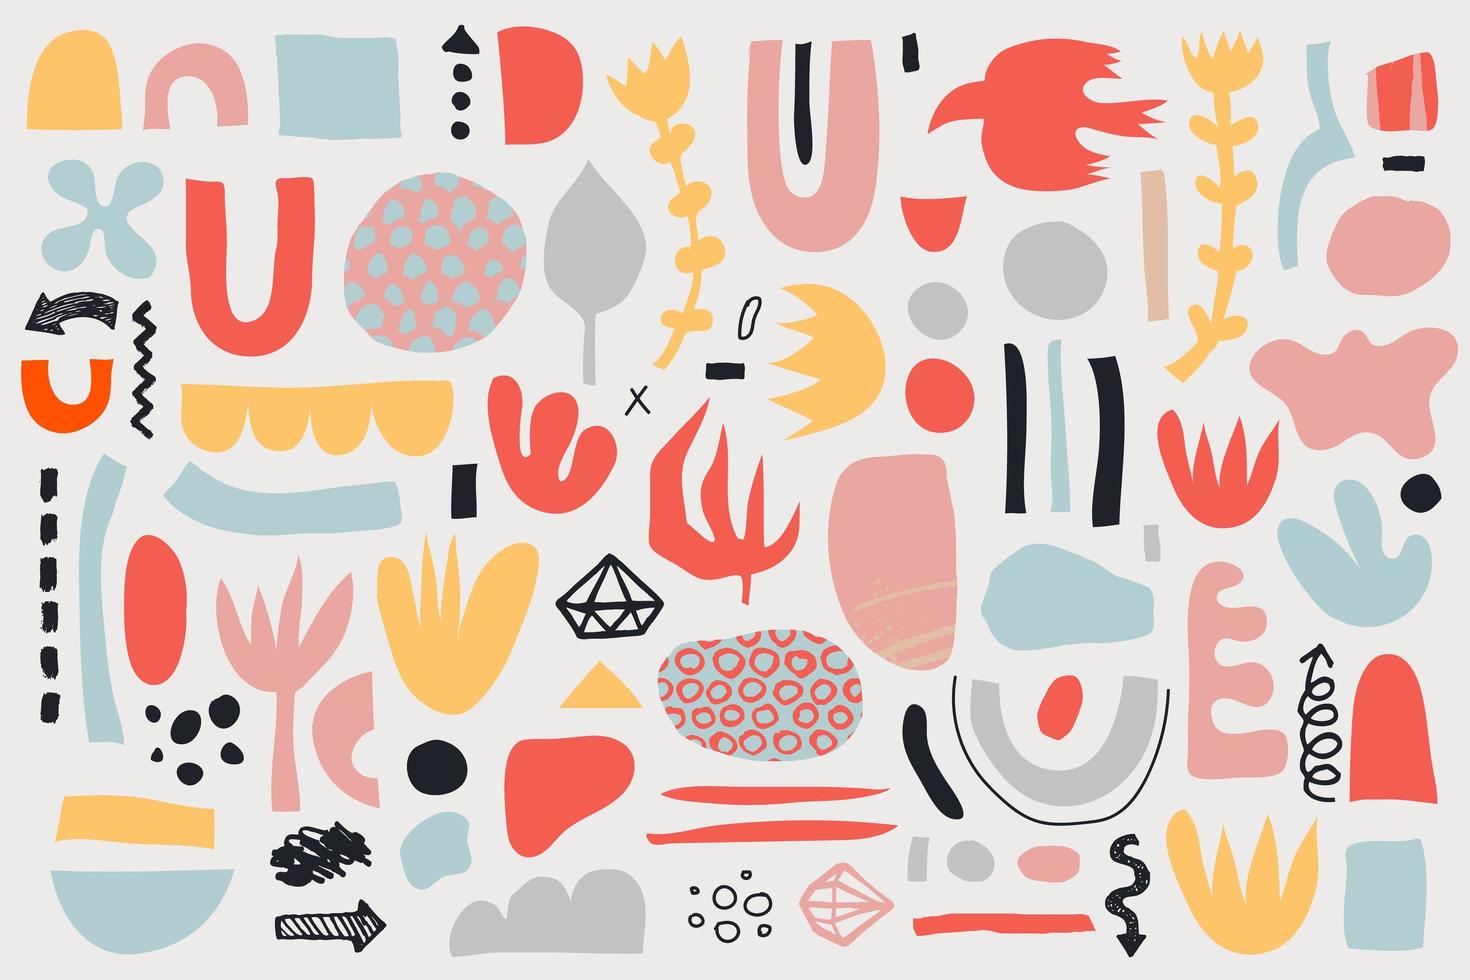 Vector collage pattern, background. Hand drawn various shapes and doodle objects, flowers, leaves. Abstract contemporary modern trendy illustration